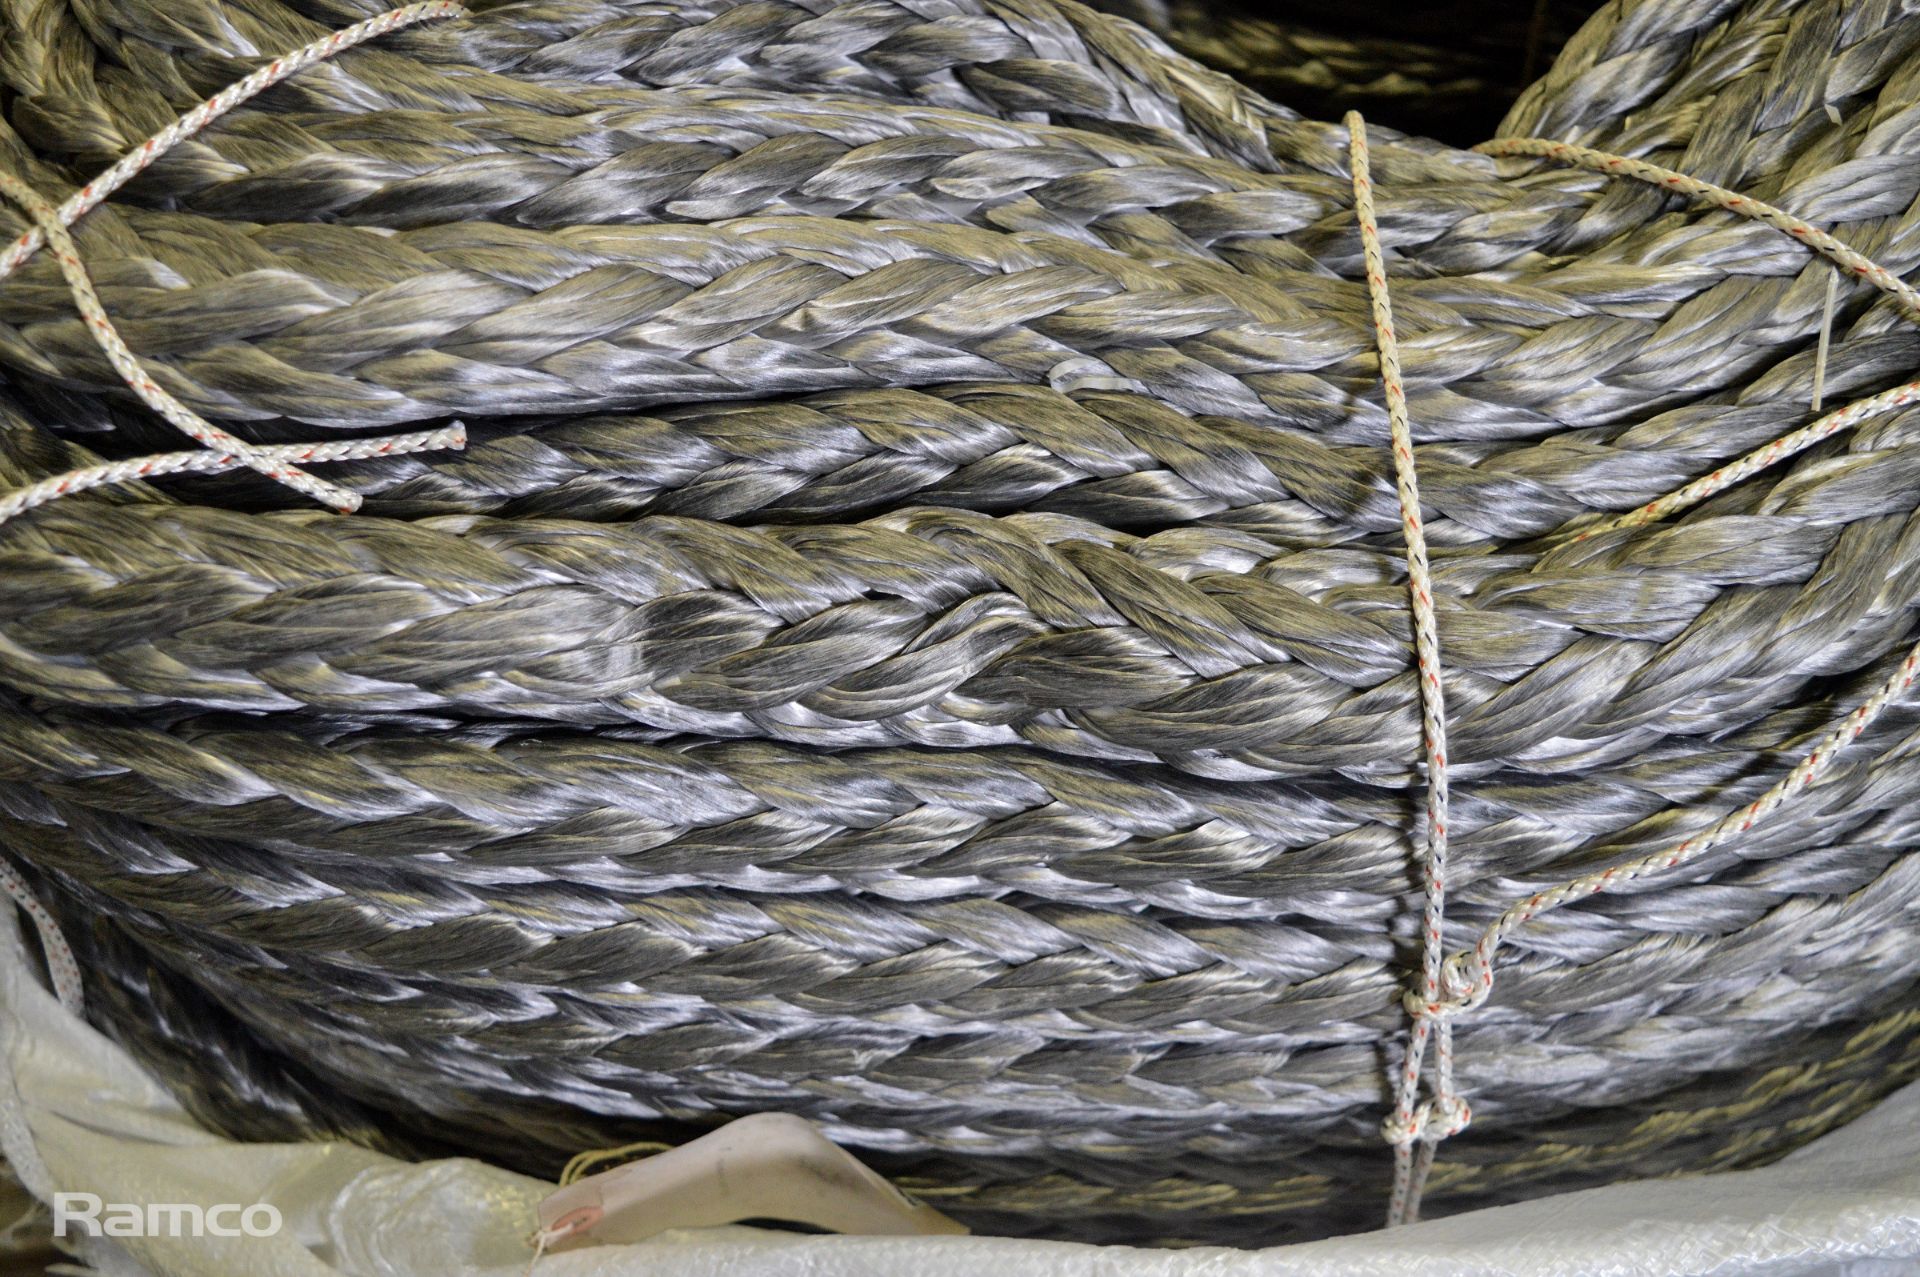 Marlow HMPE Rope 28mm x 220M - Grey - Image 2 of 3